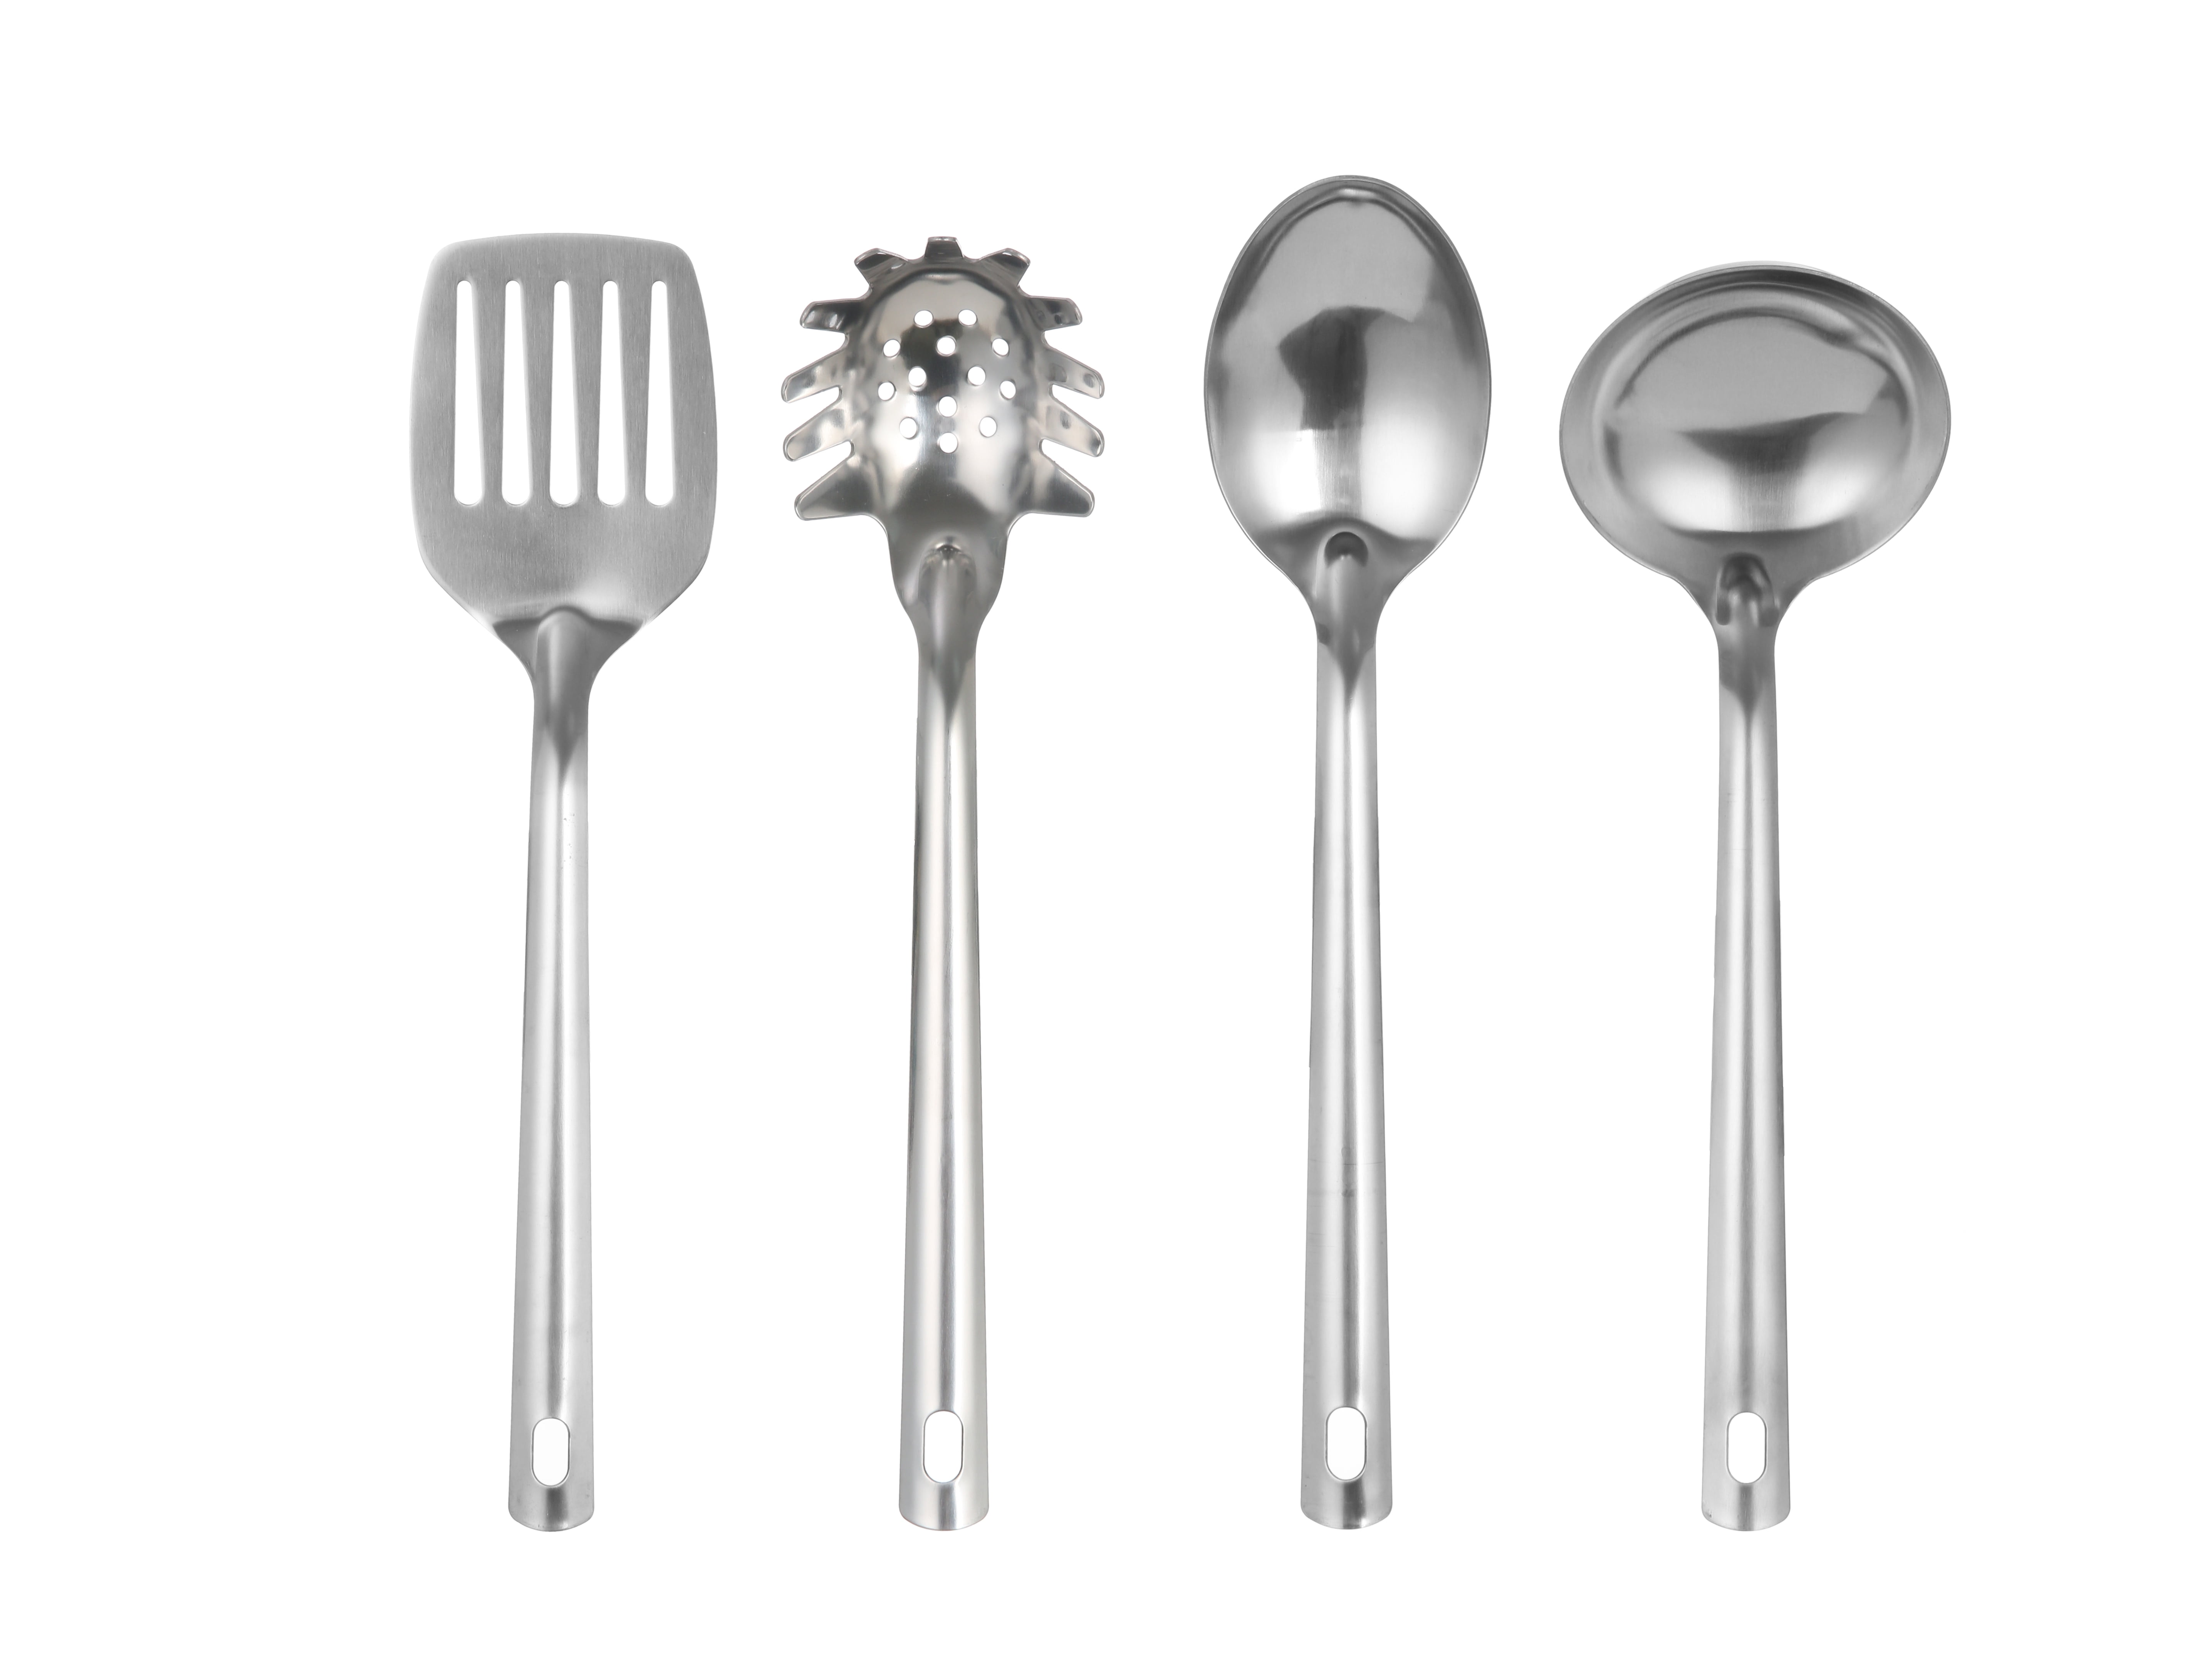 Mainstays Stainless Steel 4-Piece Kitchen Utensil Set, Spatula, Slotted Spoon, Ladle and Pasta Spoon